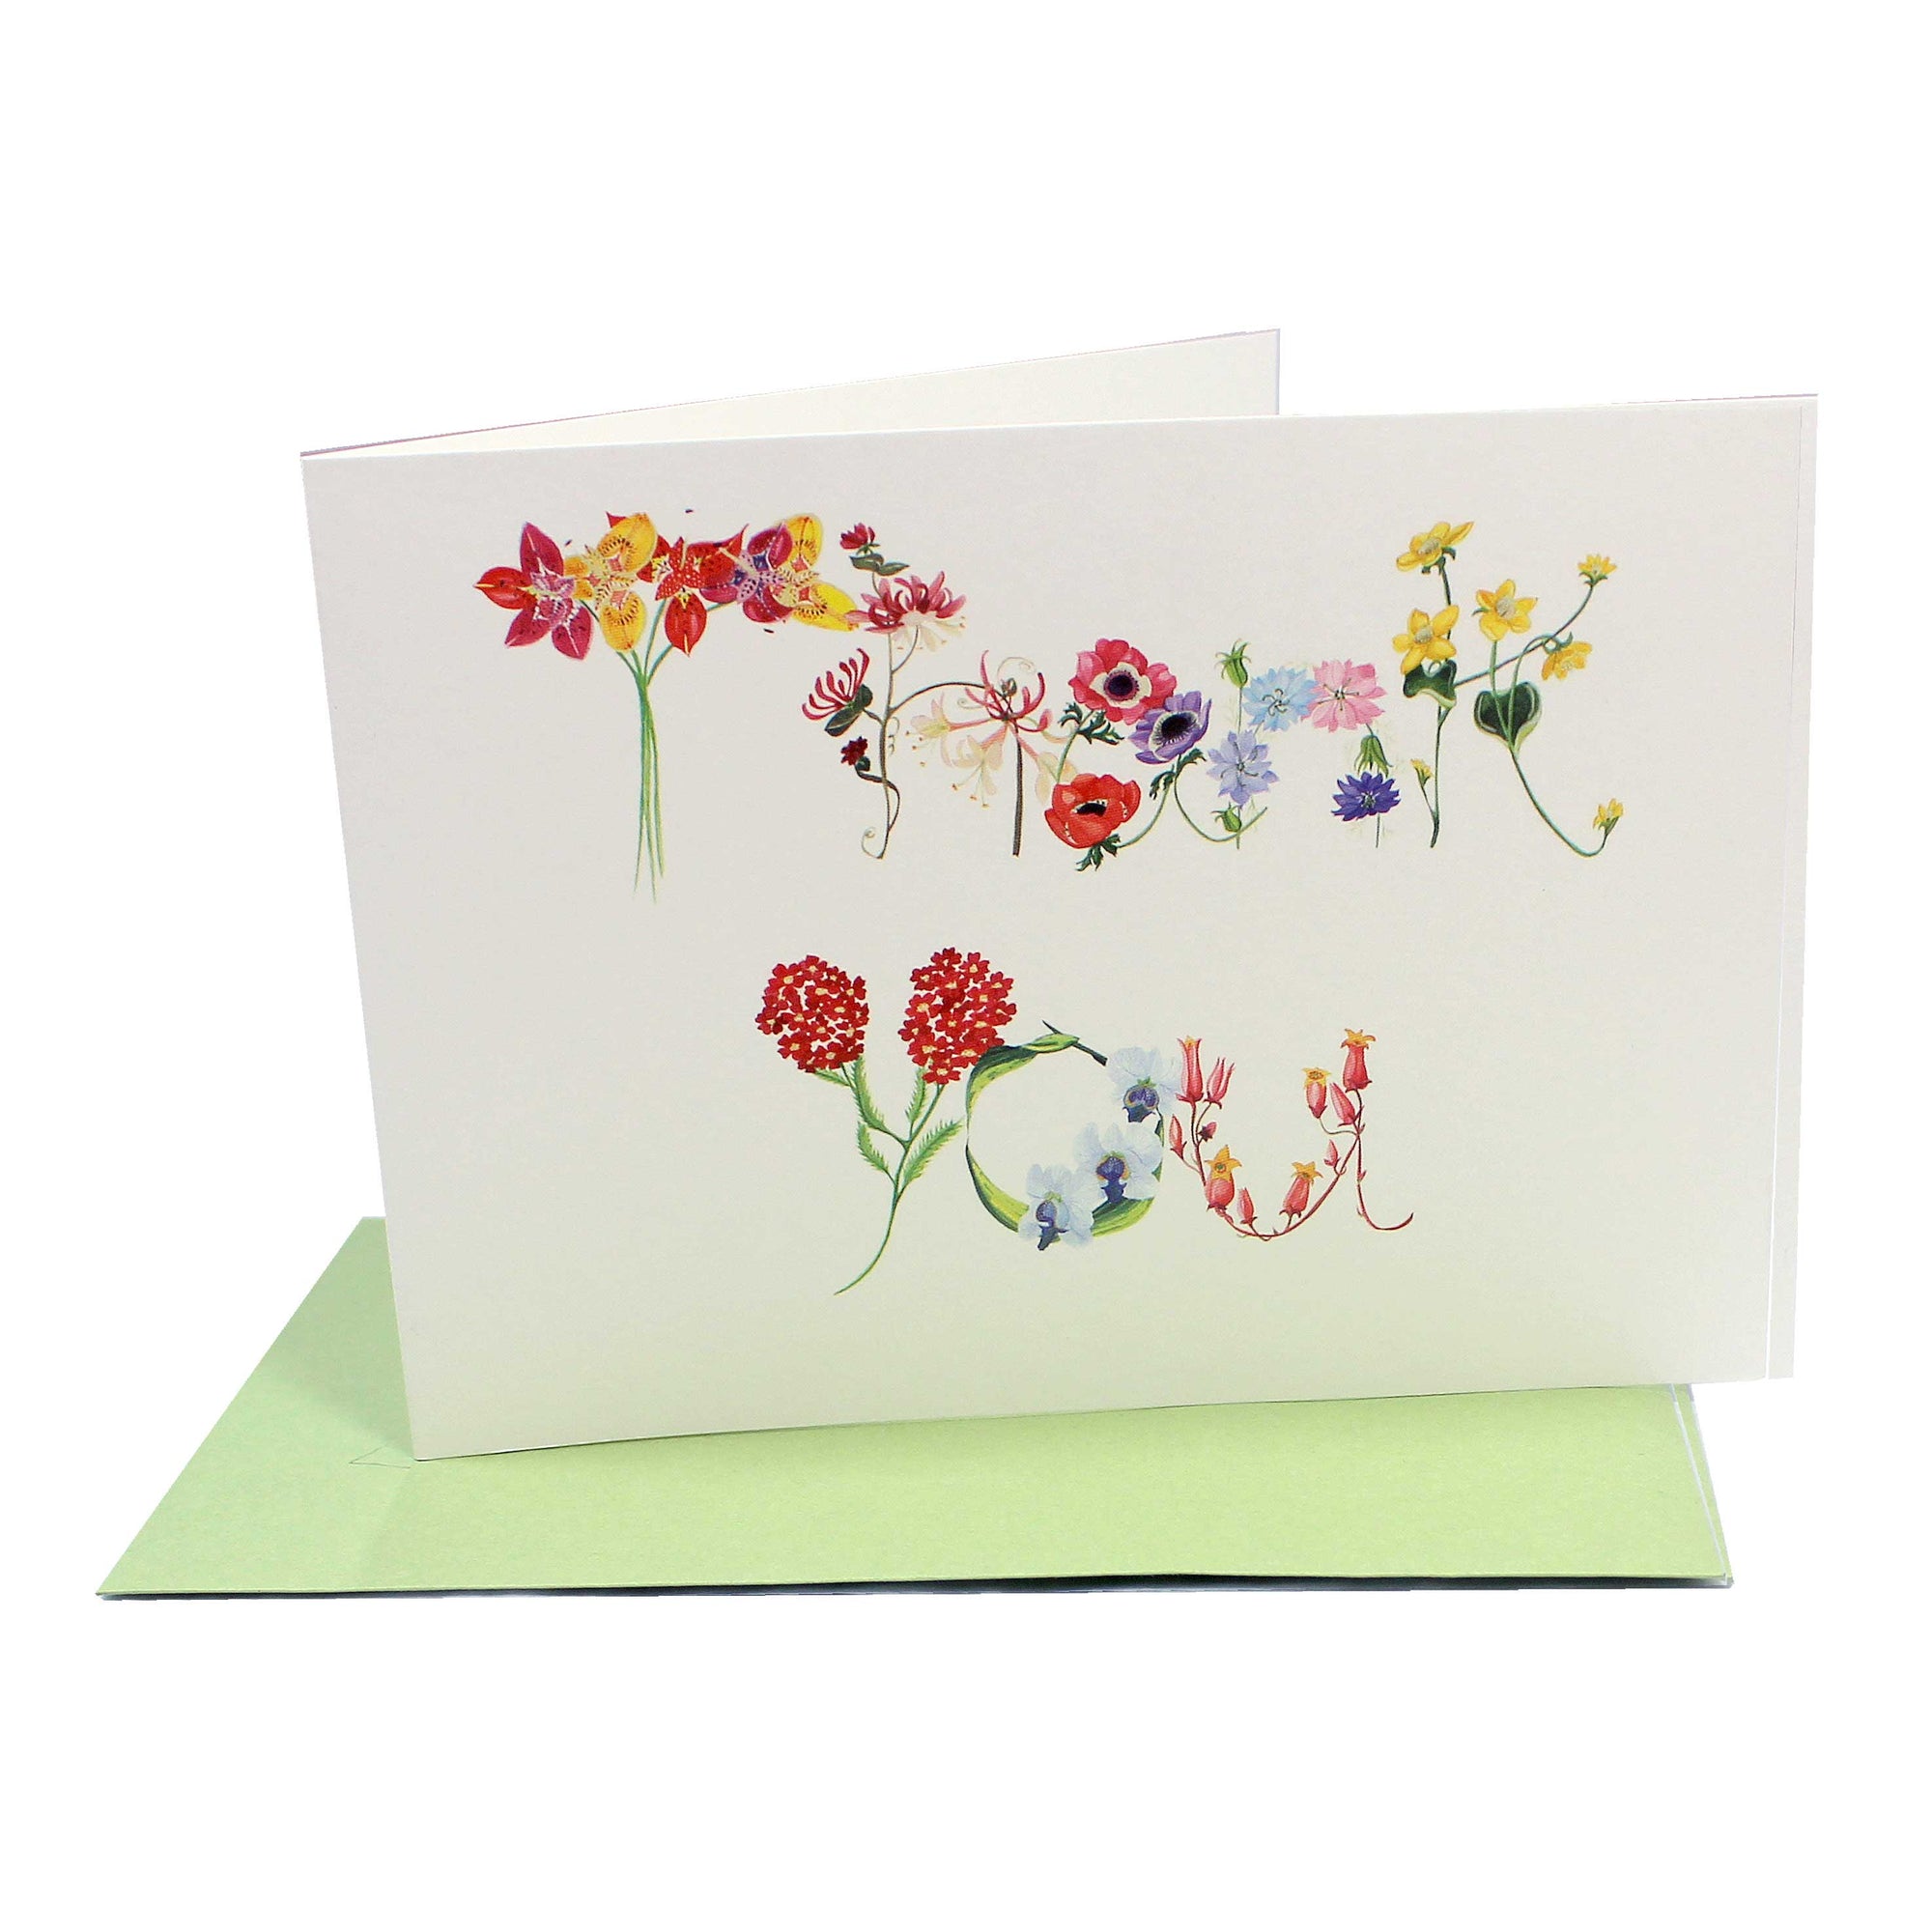 Thank You Message Card